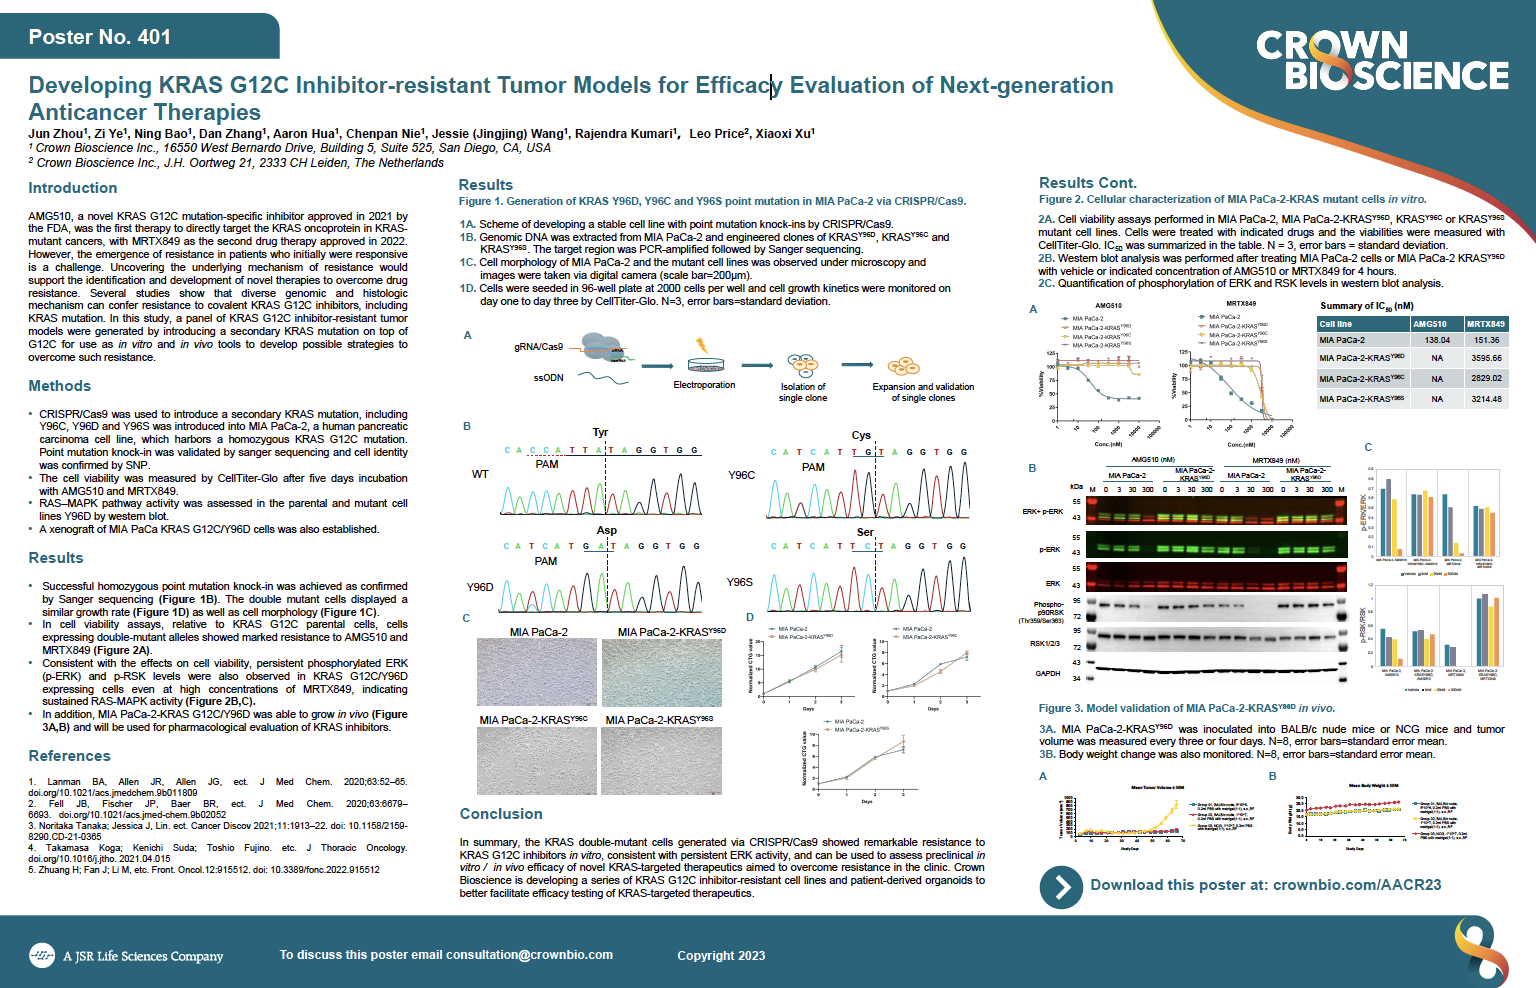 AACR 2023 Posters 401: Developing KRAS G12C Inhibitor-resistant Tumor Models for Efficacy Evaluation of Next-generation Anticancer Therapies